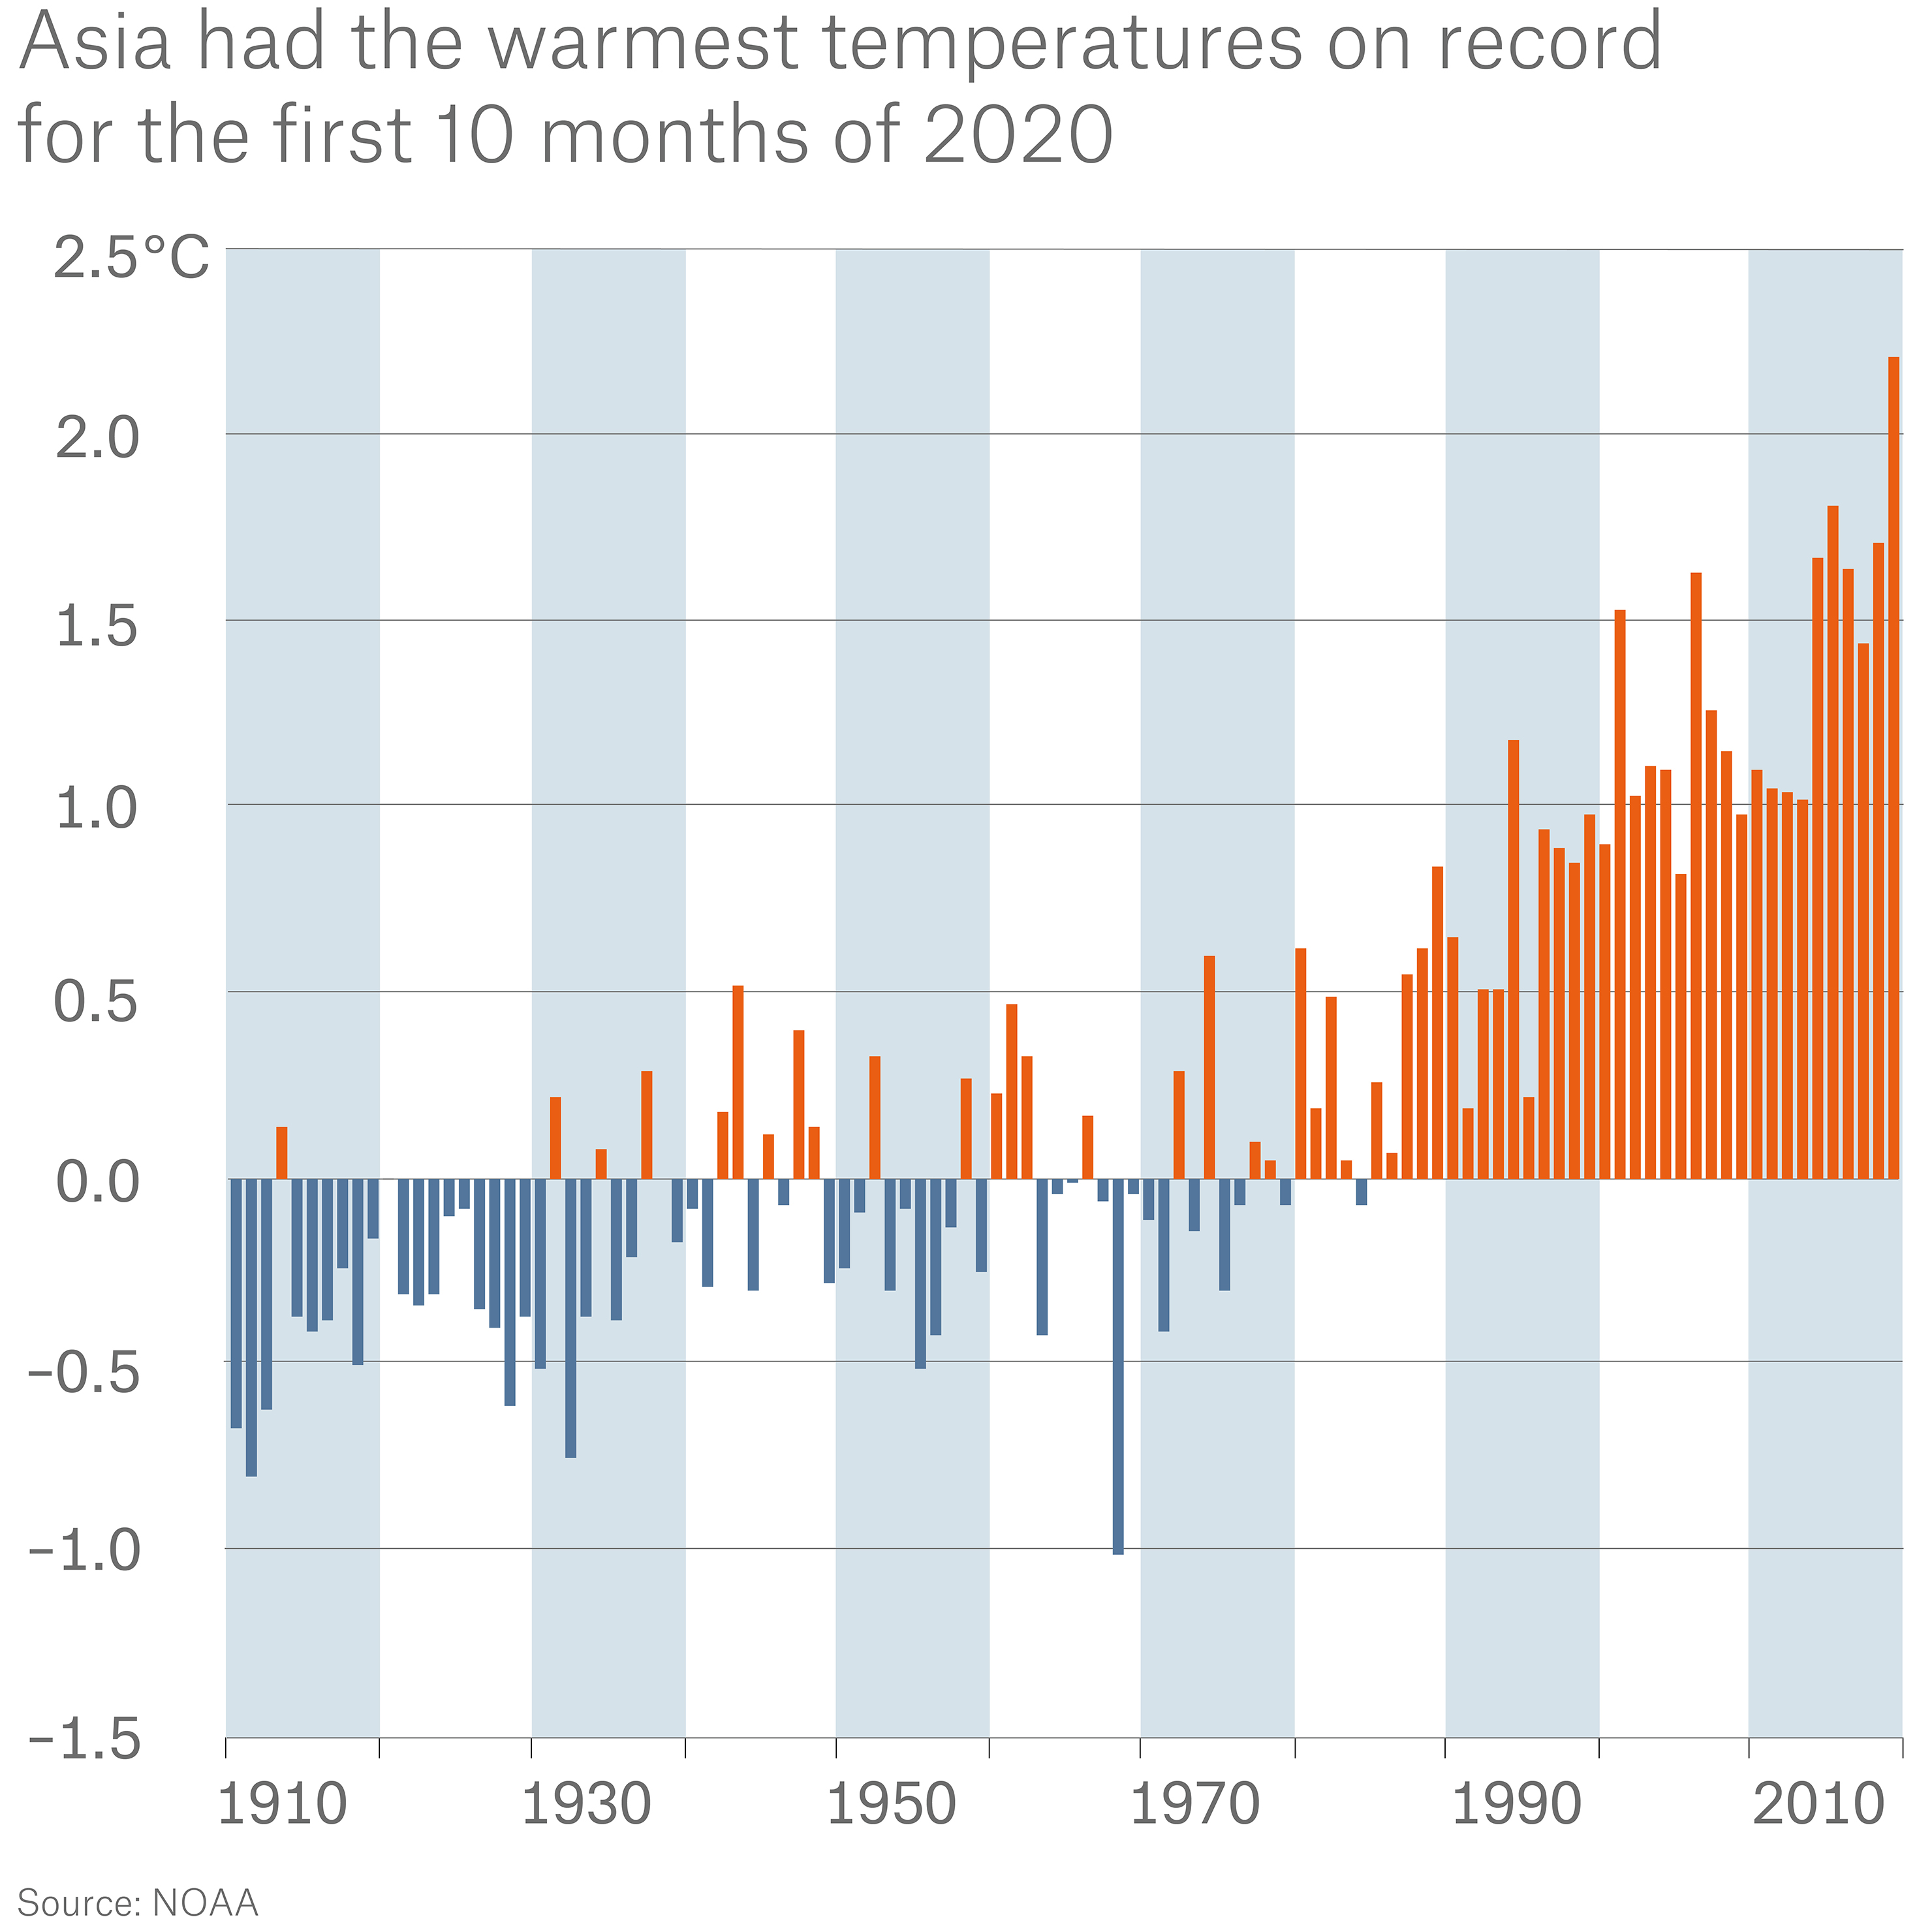 Asia had the warmest temperatures on record for the first 10 months of 2020